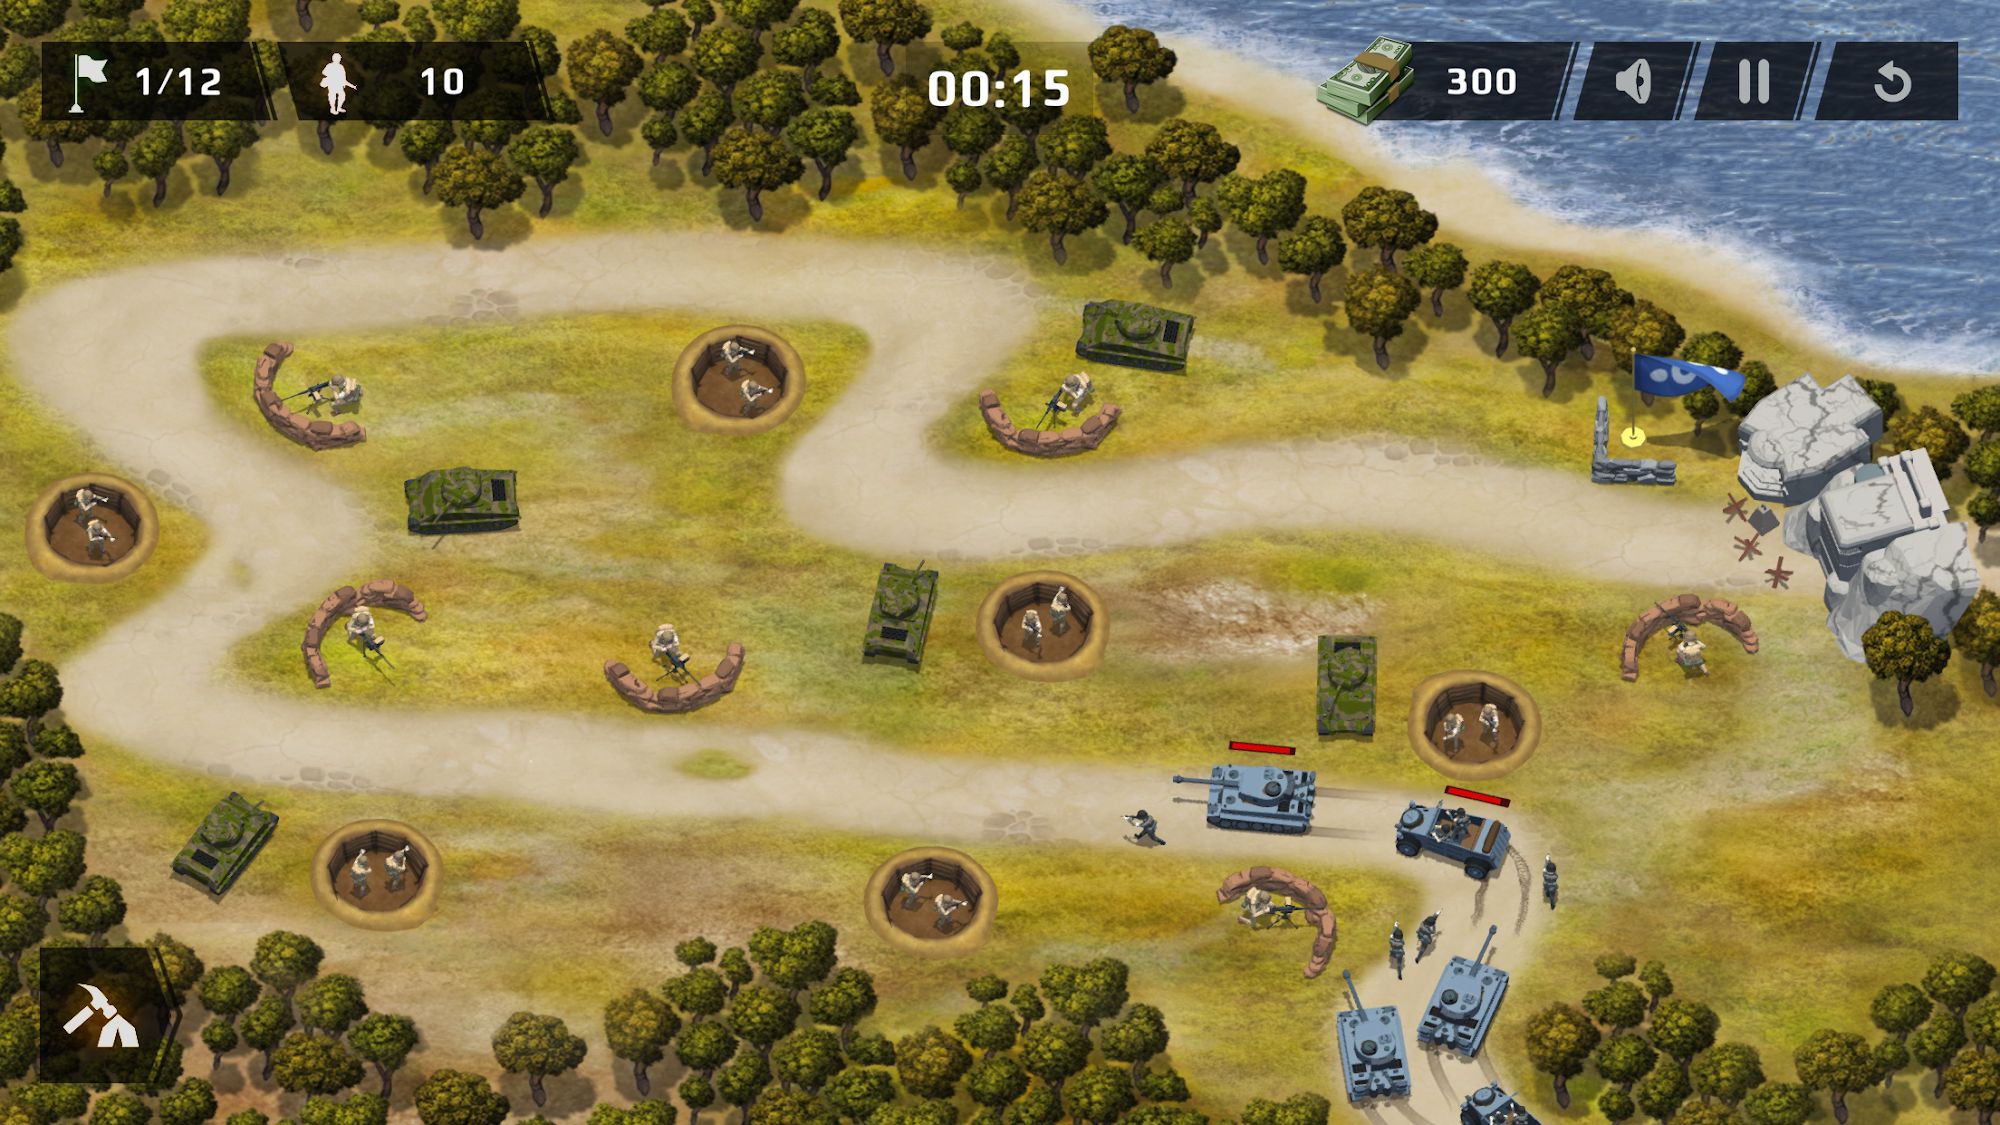 Télécharger WWII Defense: RTS Army TD game pour Android gratuit.